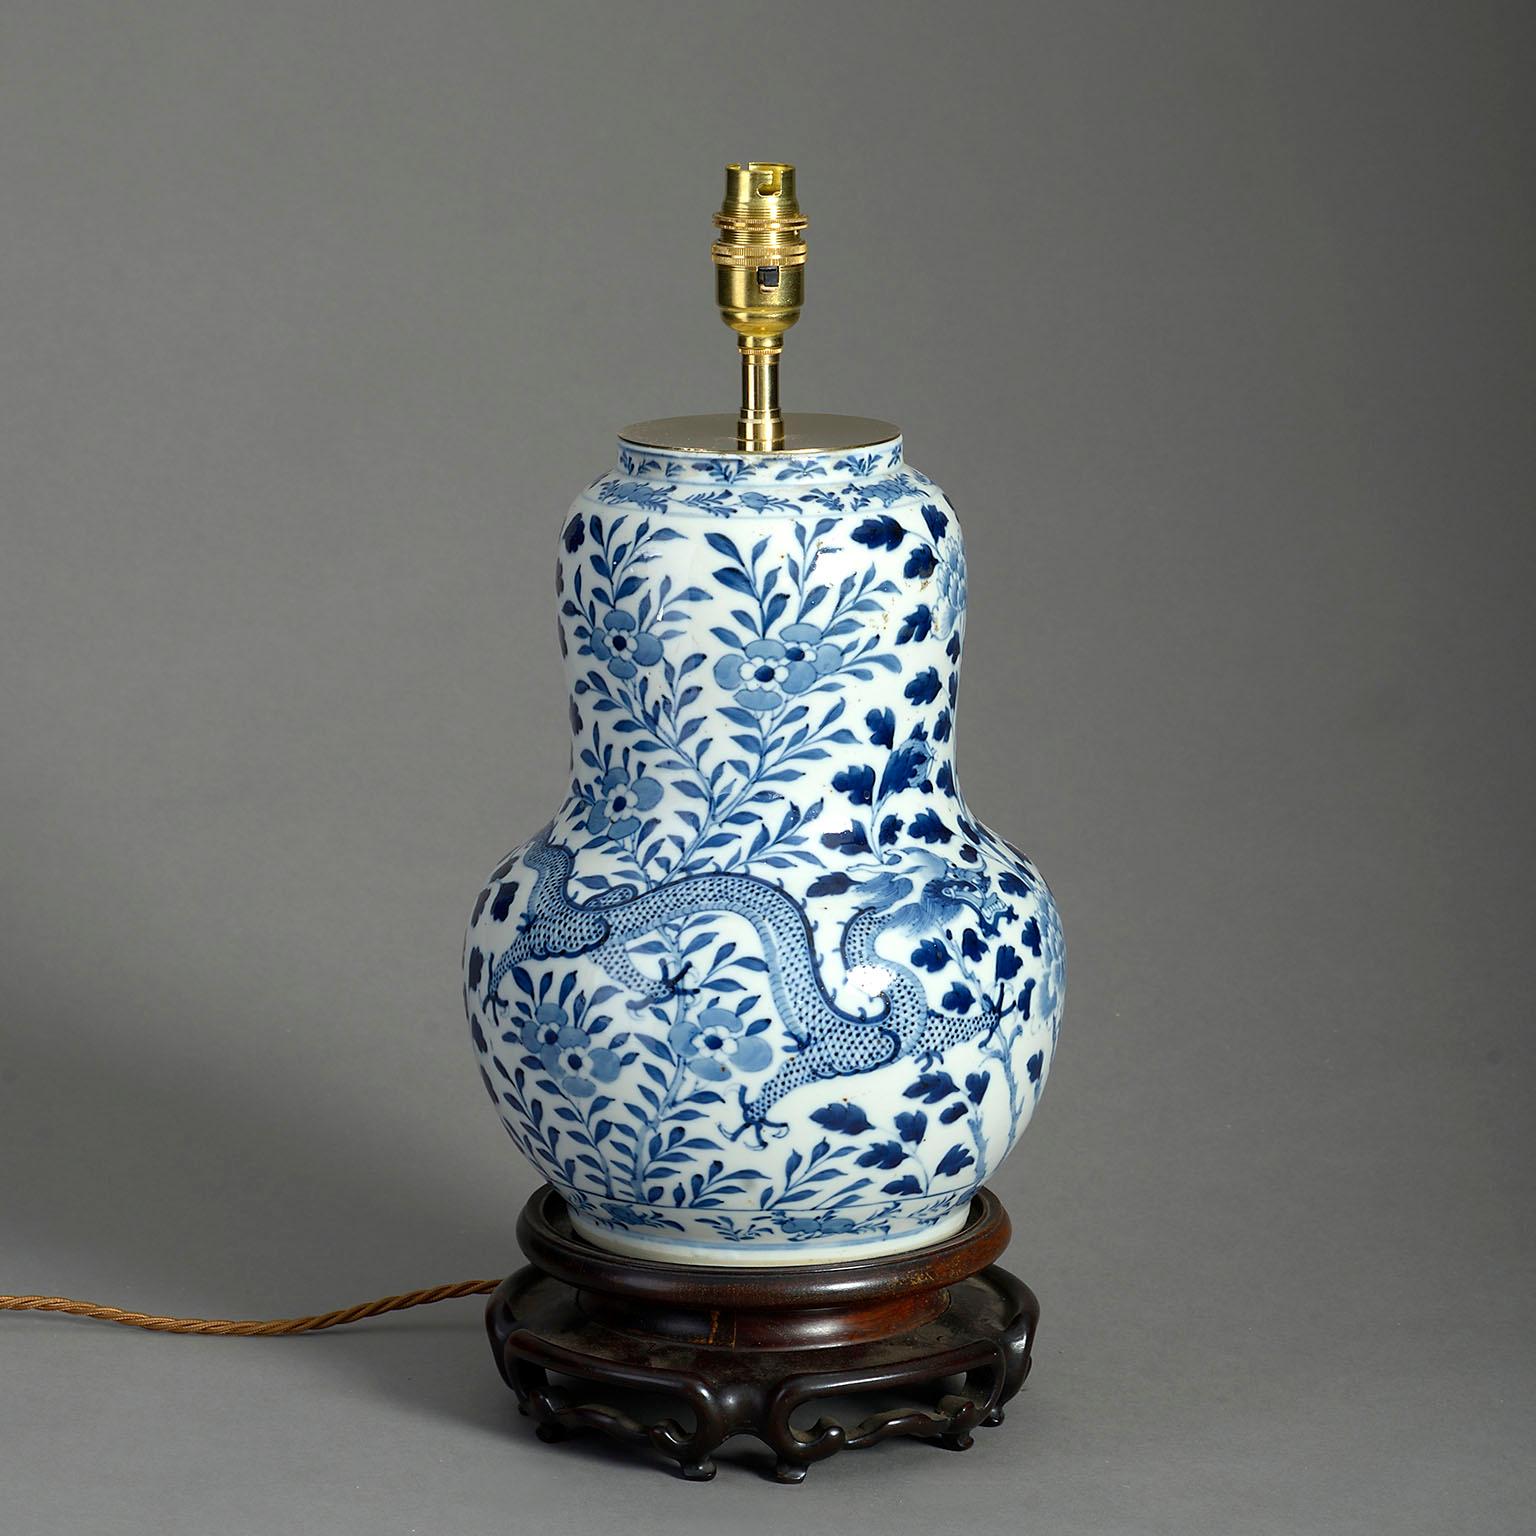 A mid-nineteenth century blue and white glazed vase of generous gourd form, decorated with dragons, flowers and foliage, set upon a carved hard wood stand and now wired as a lamp.

Dimensions refer to vase and wooden base only.

Display shade